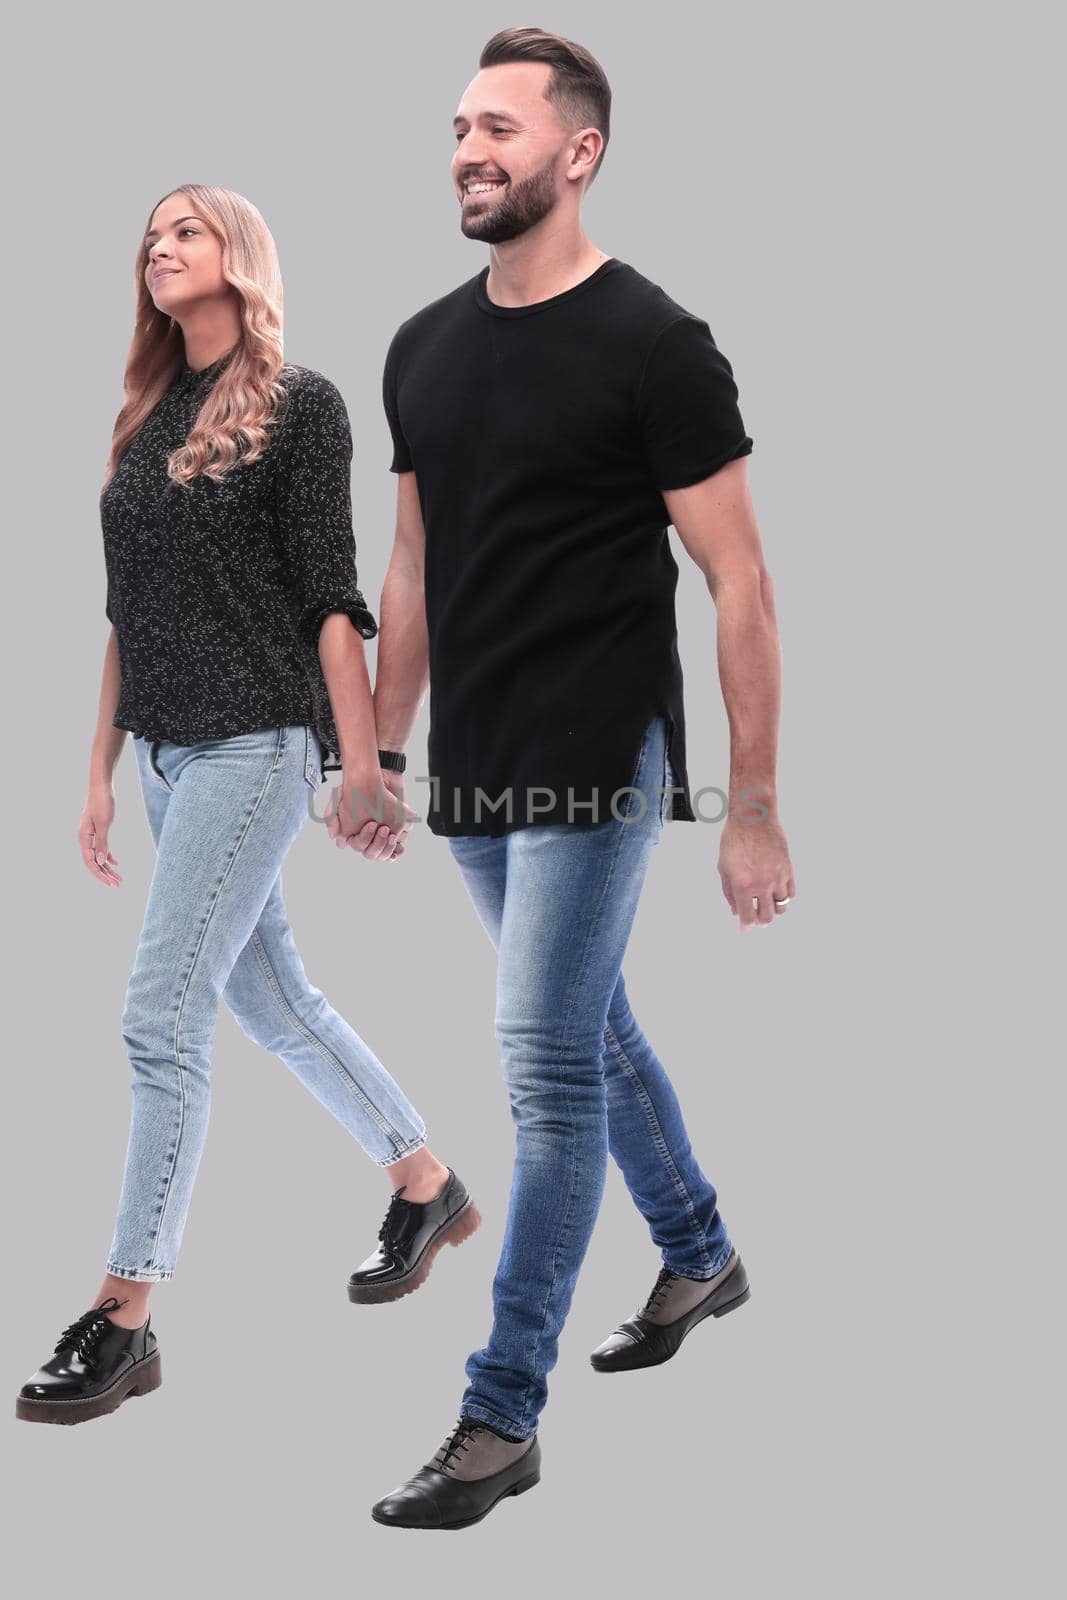 in full growth. young couple walking together by asdf